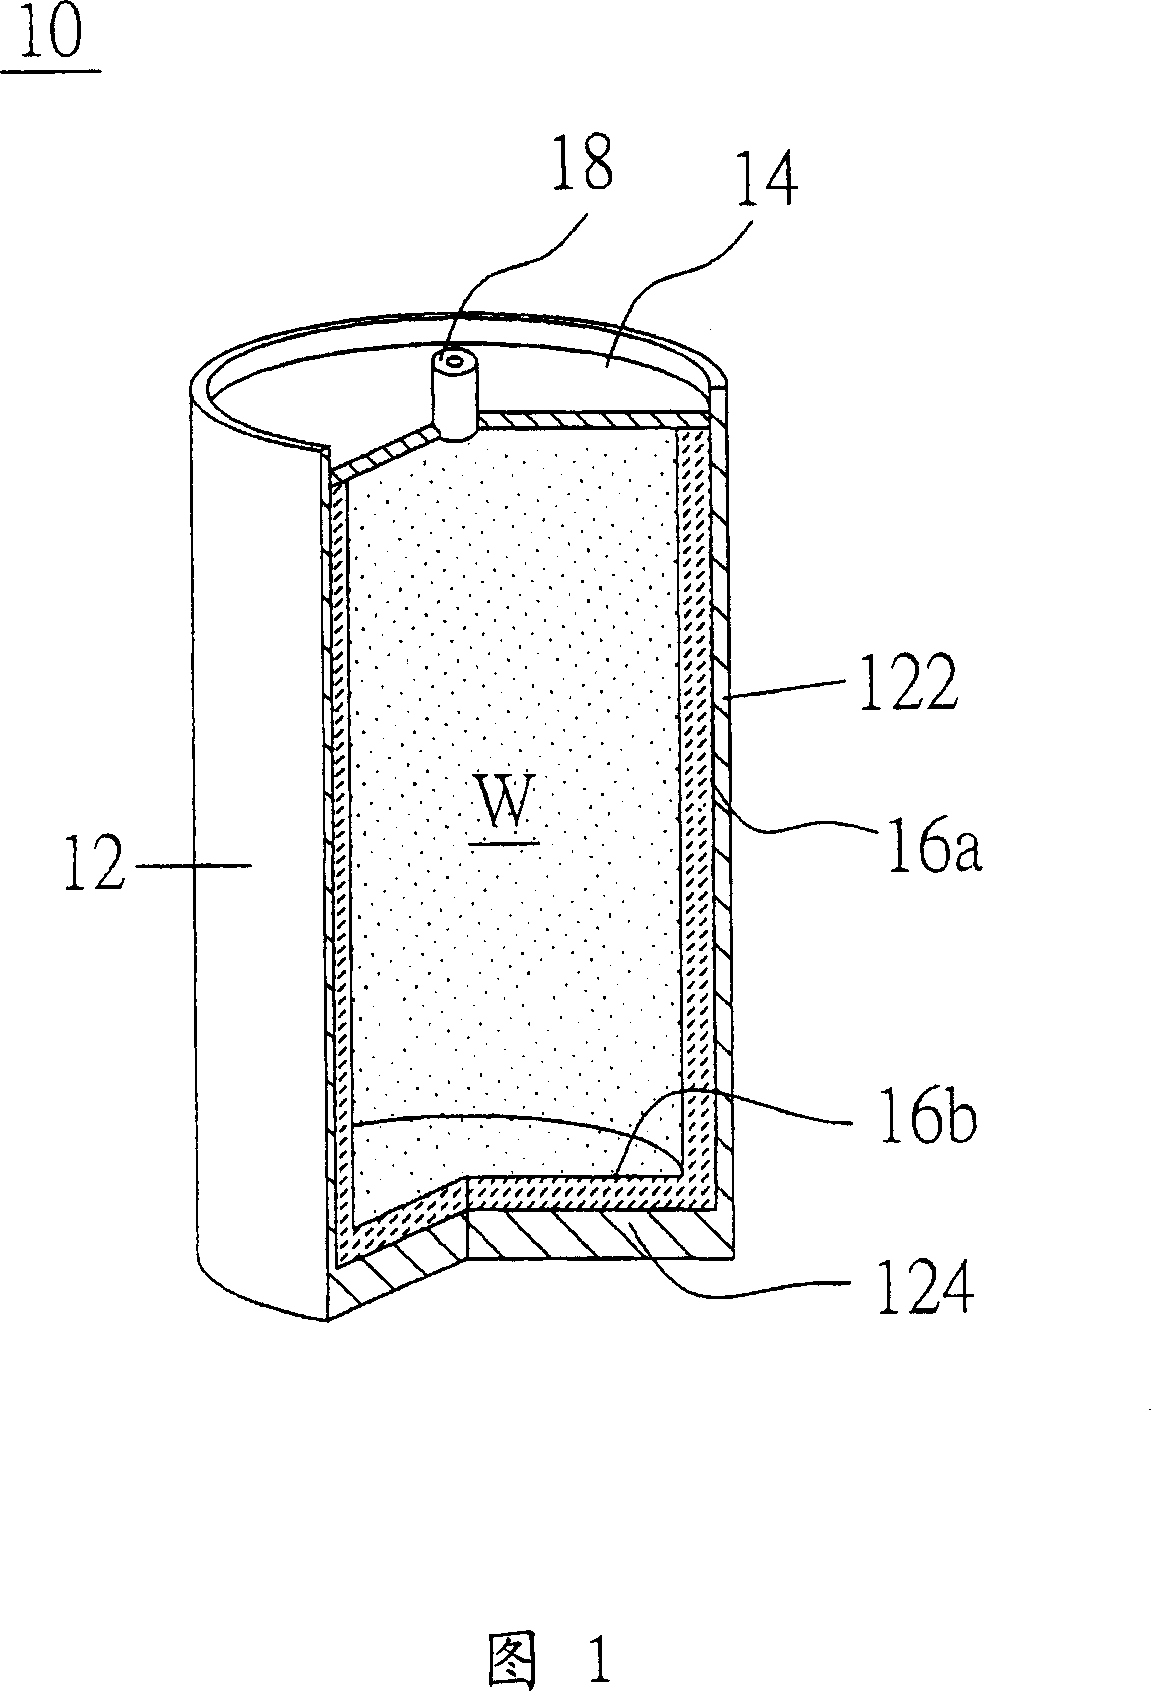 Radiation module and its heat pipe